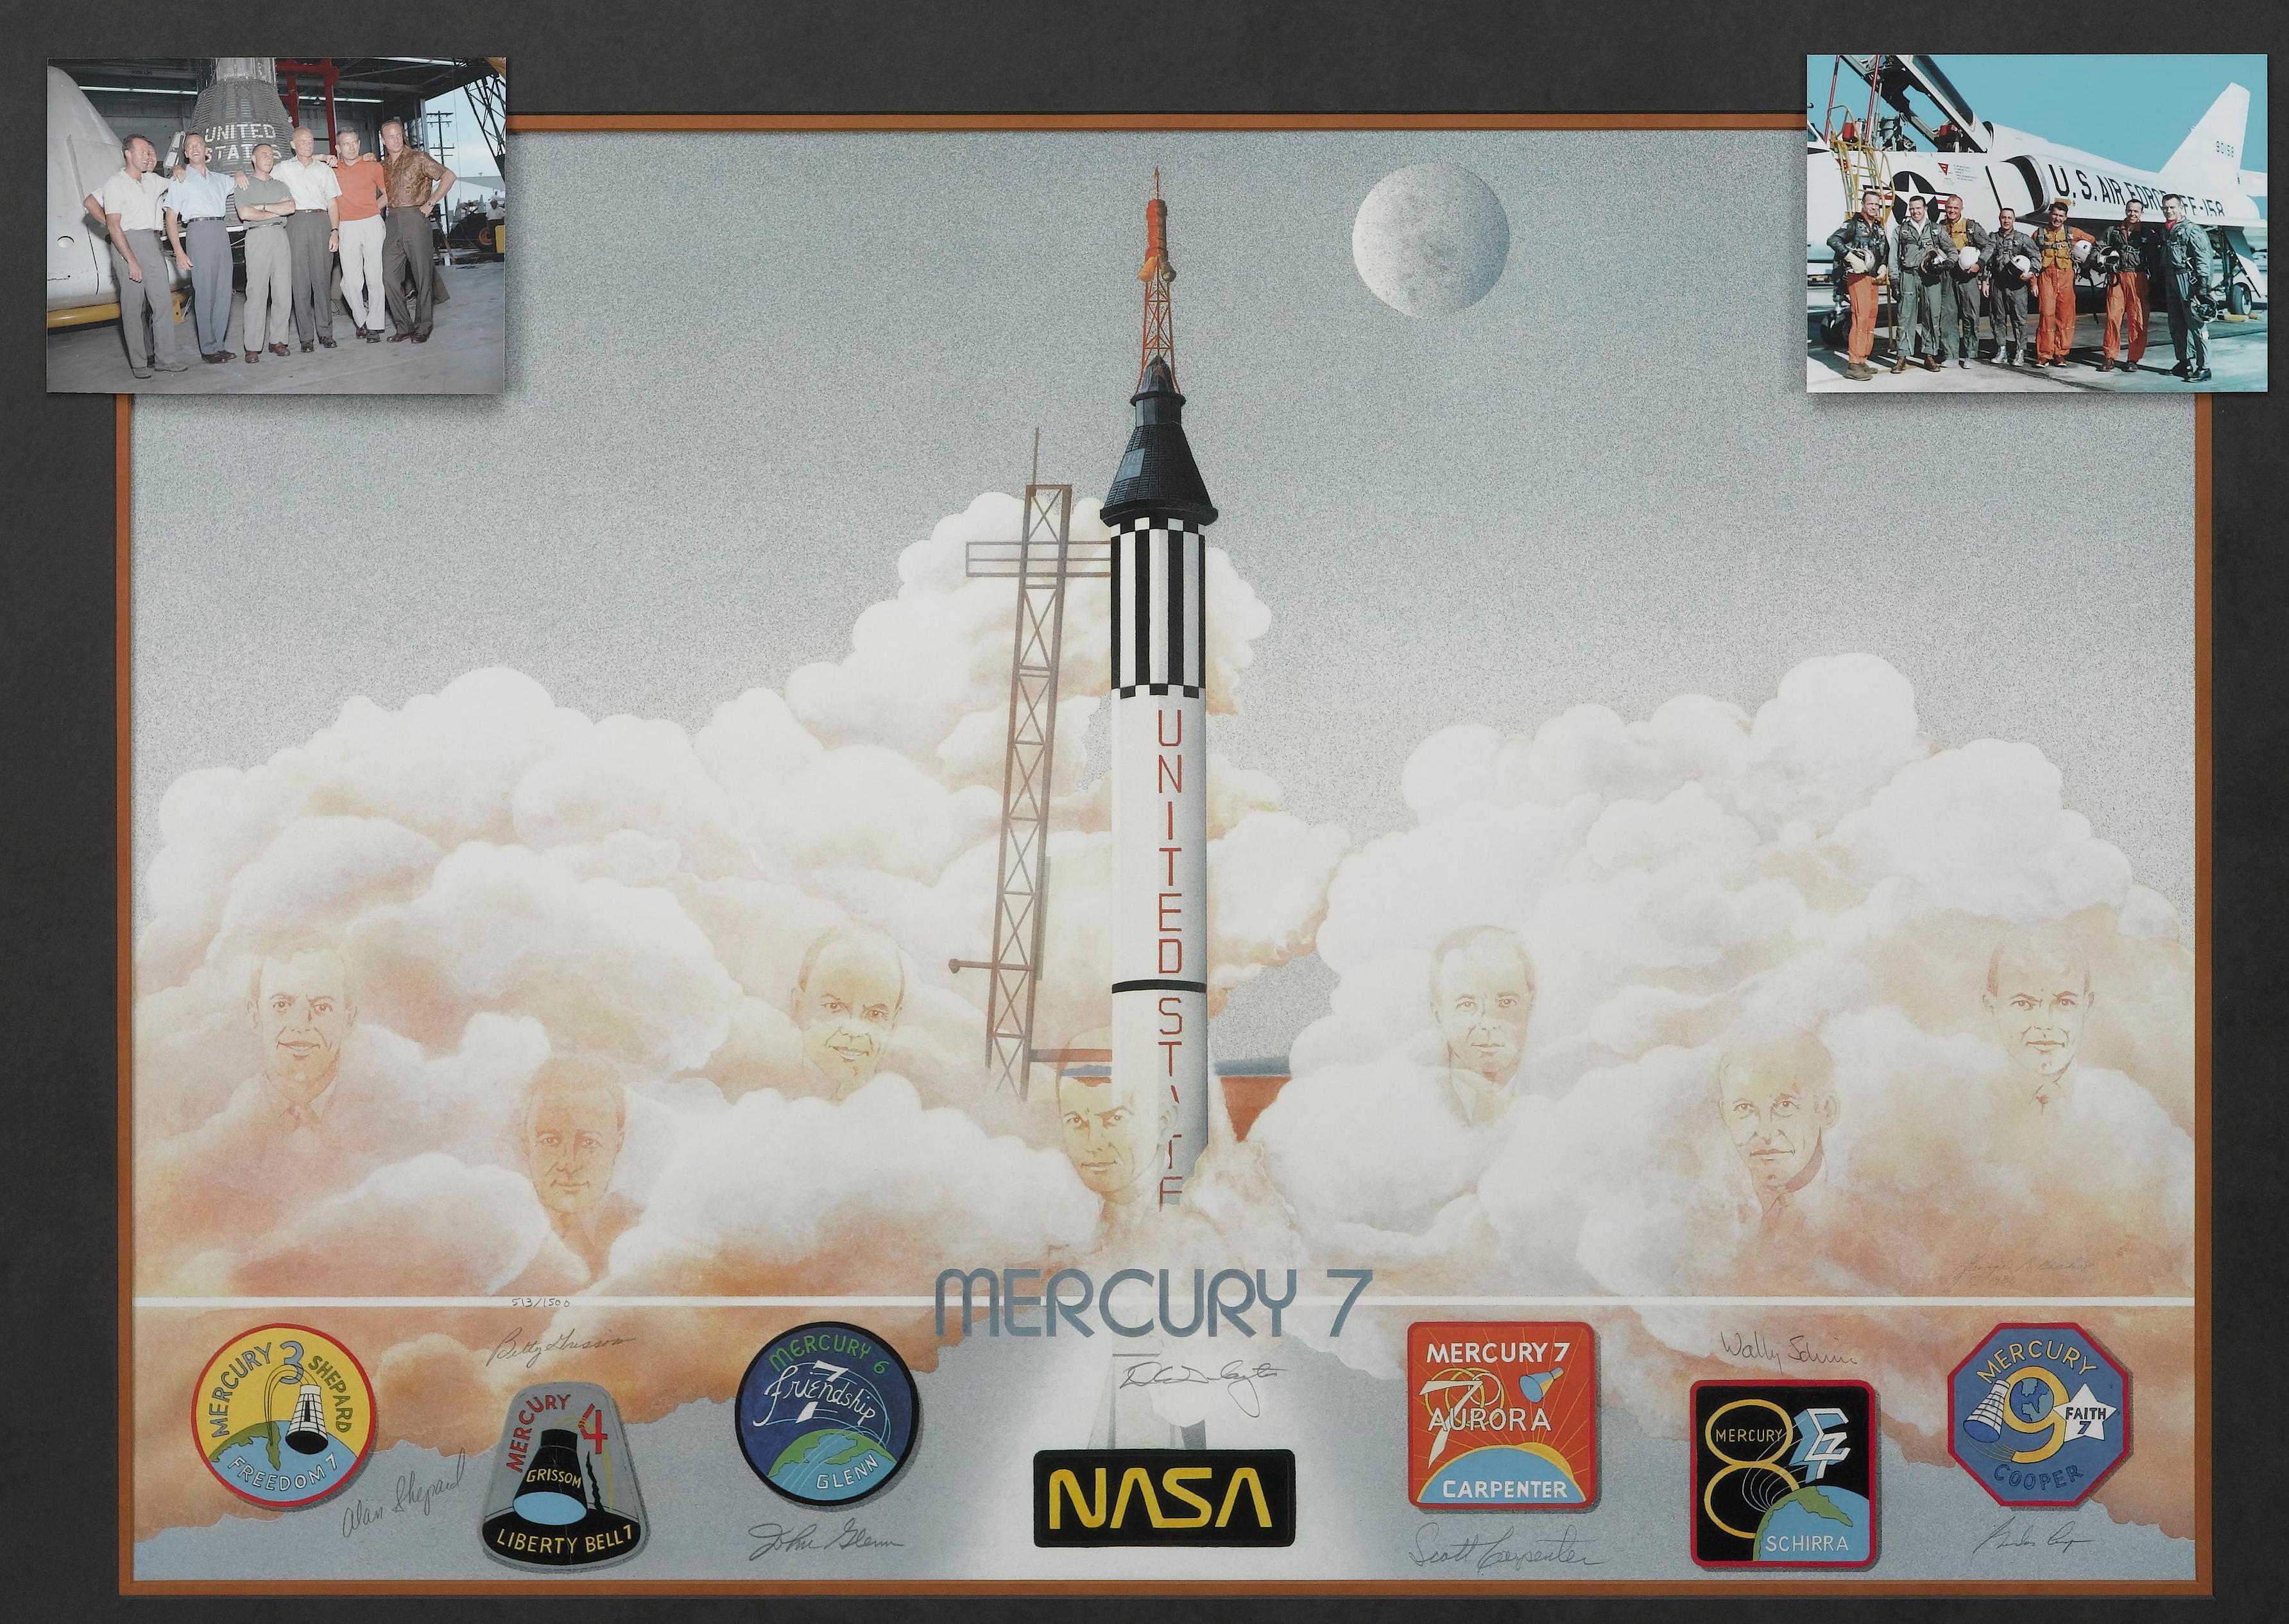 This iconic Mercury Seven color lithograph, by artist George Bishop, is a signed limited edition collector's piece celebrating America's seven first space pioneers; the seven chosen astronauts for Project Mercury and the race to space with the